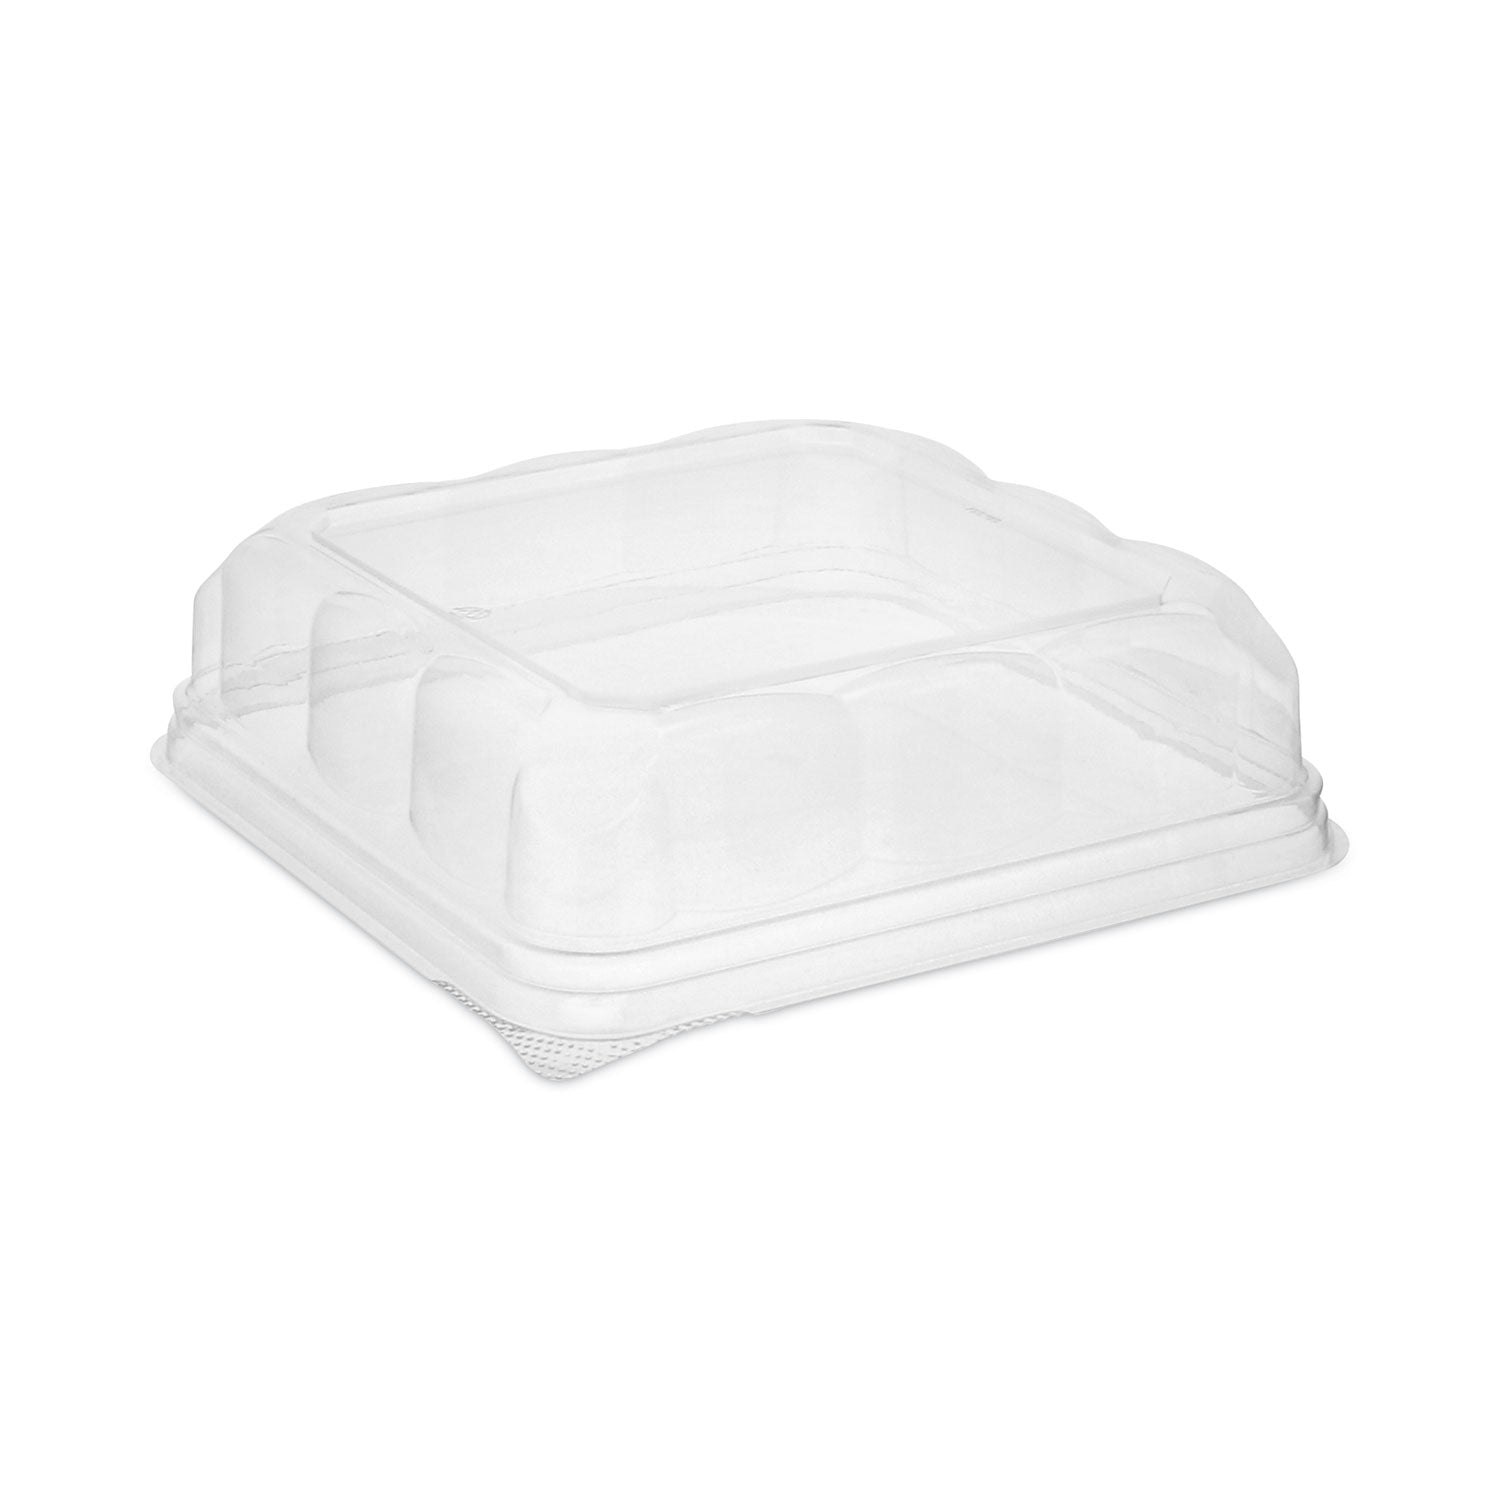 recycled-container-lid-dome-lid-for-6-x-6-brownie-container-75-x-75-x-202-clear-plastic-195-carton_pct75s20sdome - 1